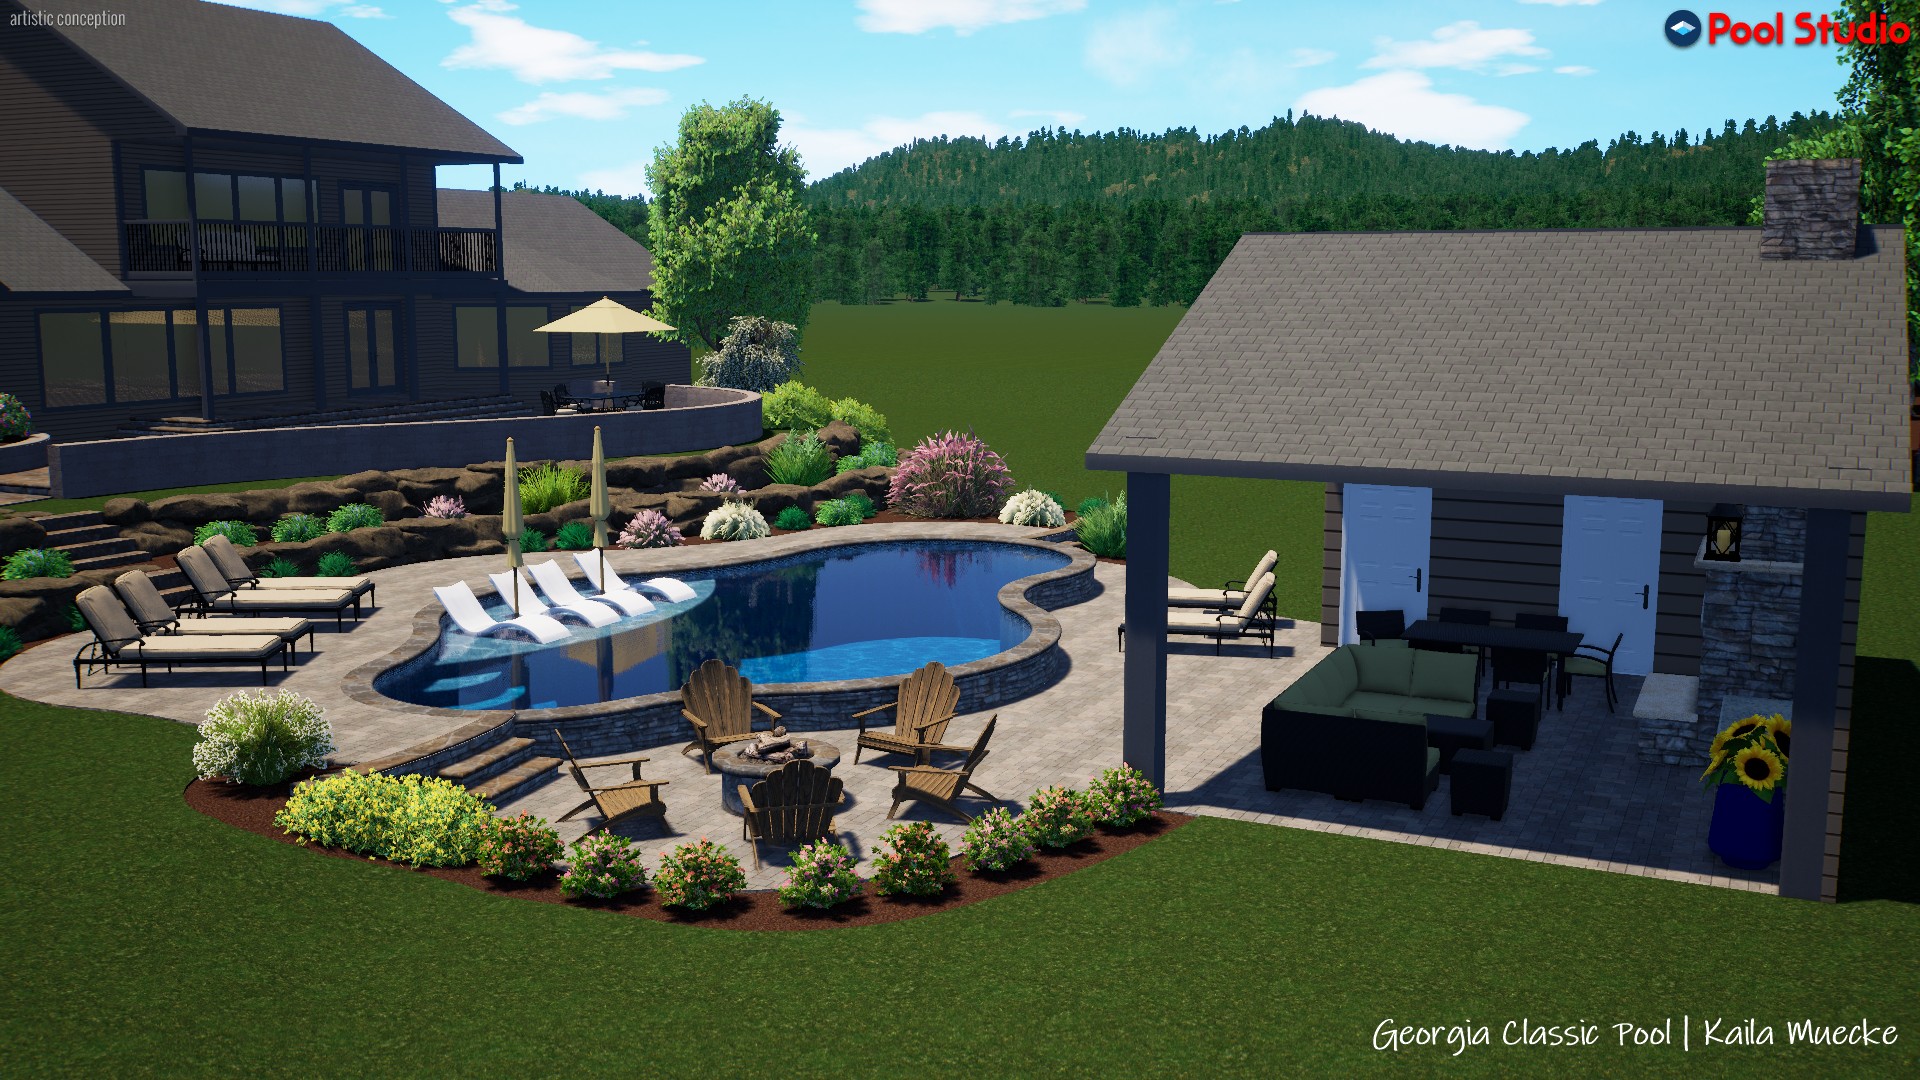 A 3D rendering of a modern pool with a sleek cabana nestled beside it.